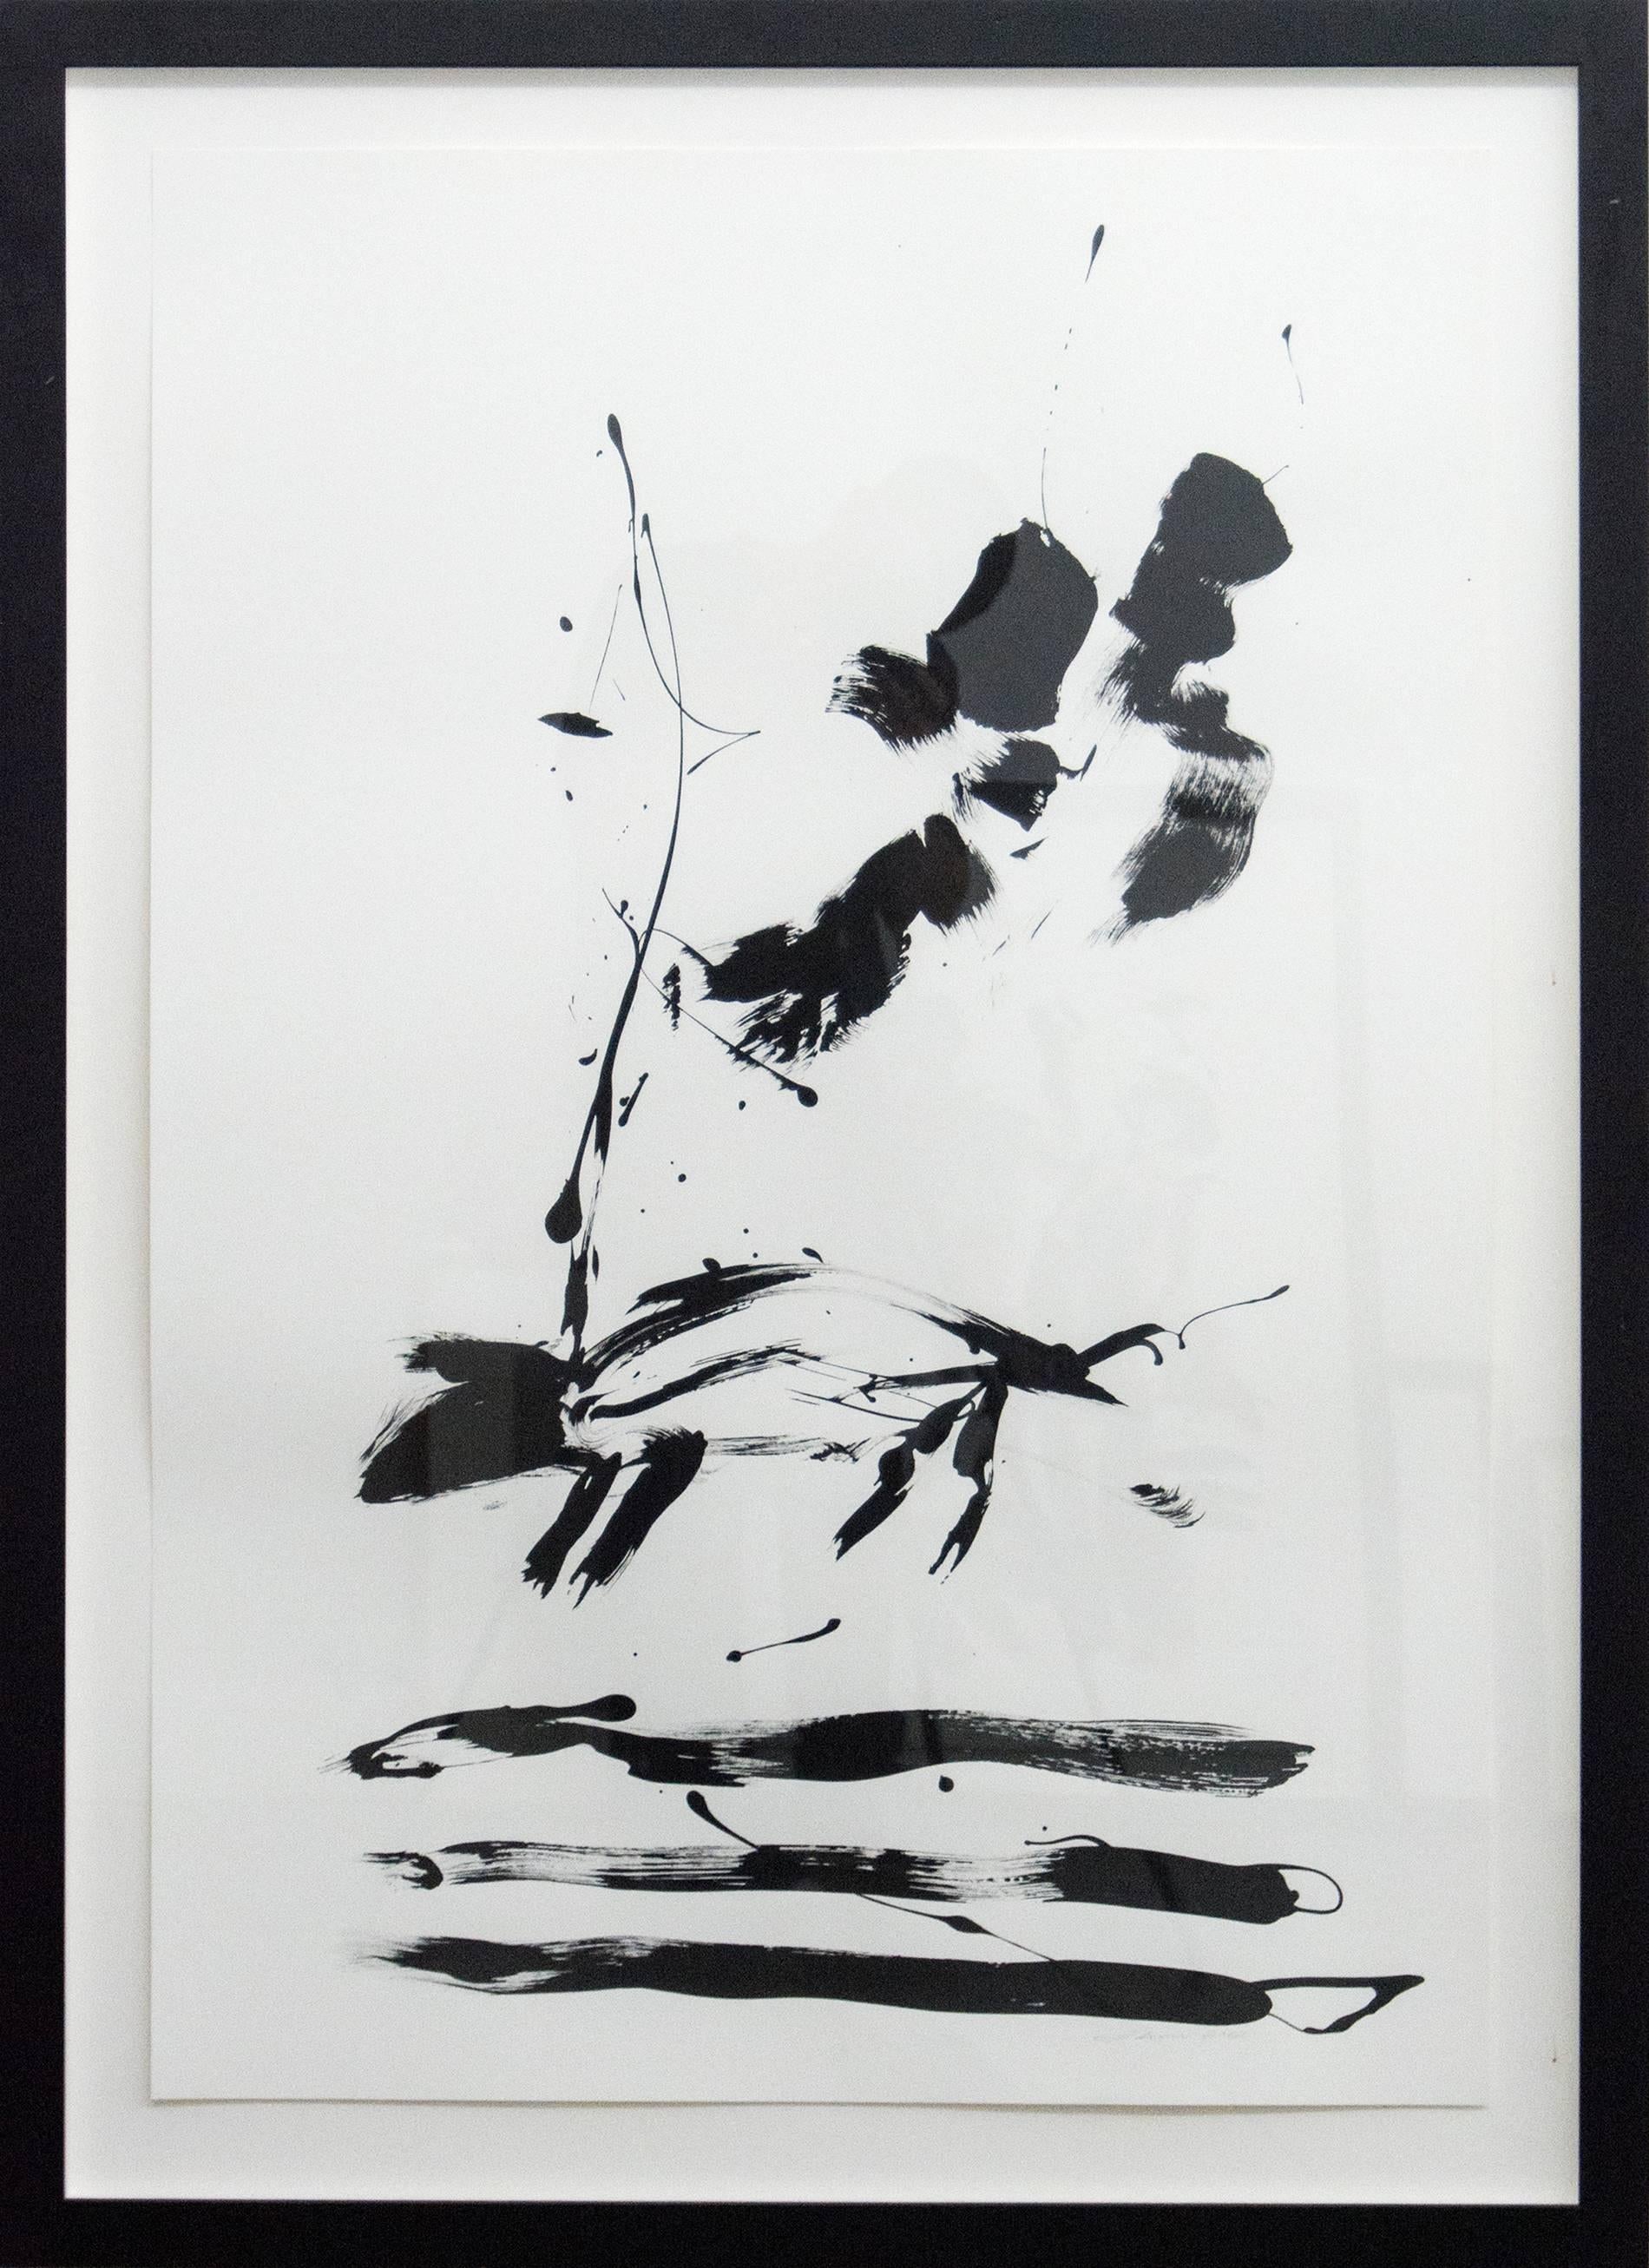 Lynne Fernie Animal Painting - Off the Leash - black & white, minimalist, figurative abstract, ink on paper